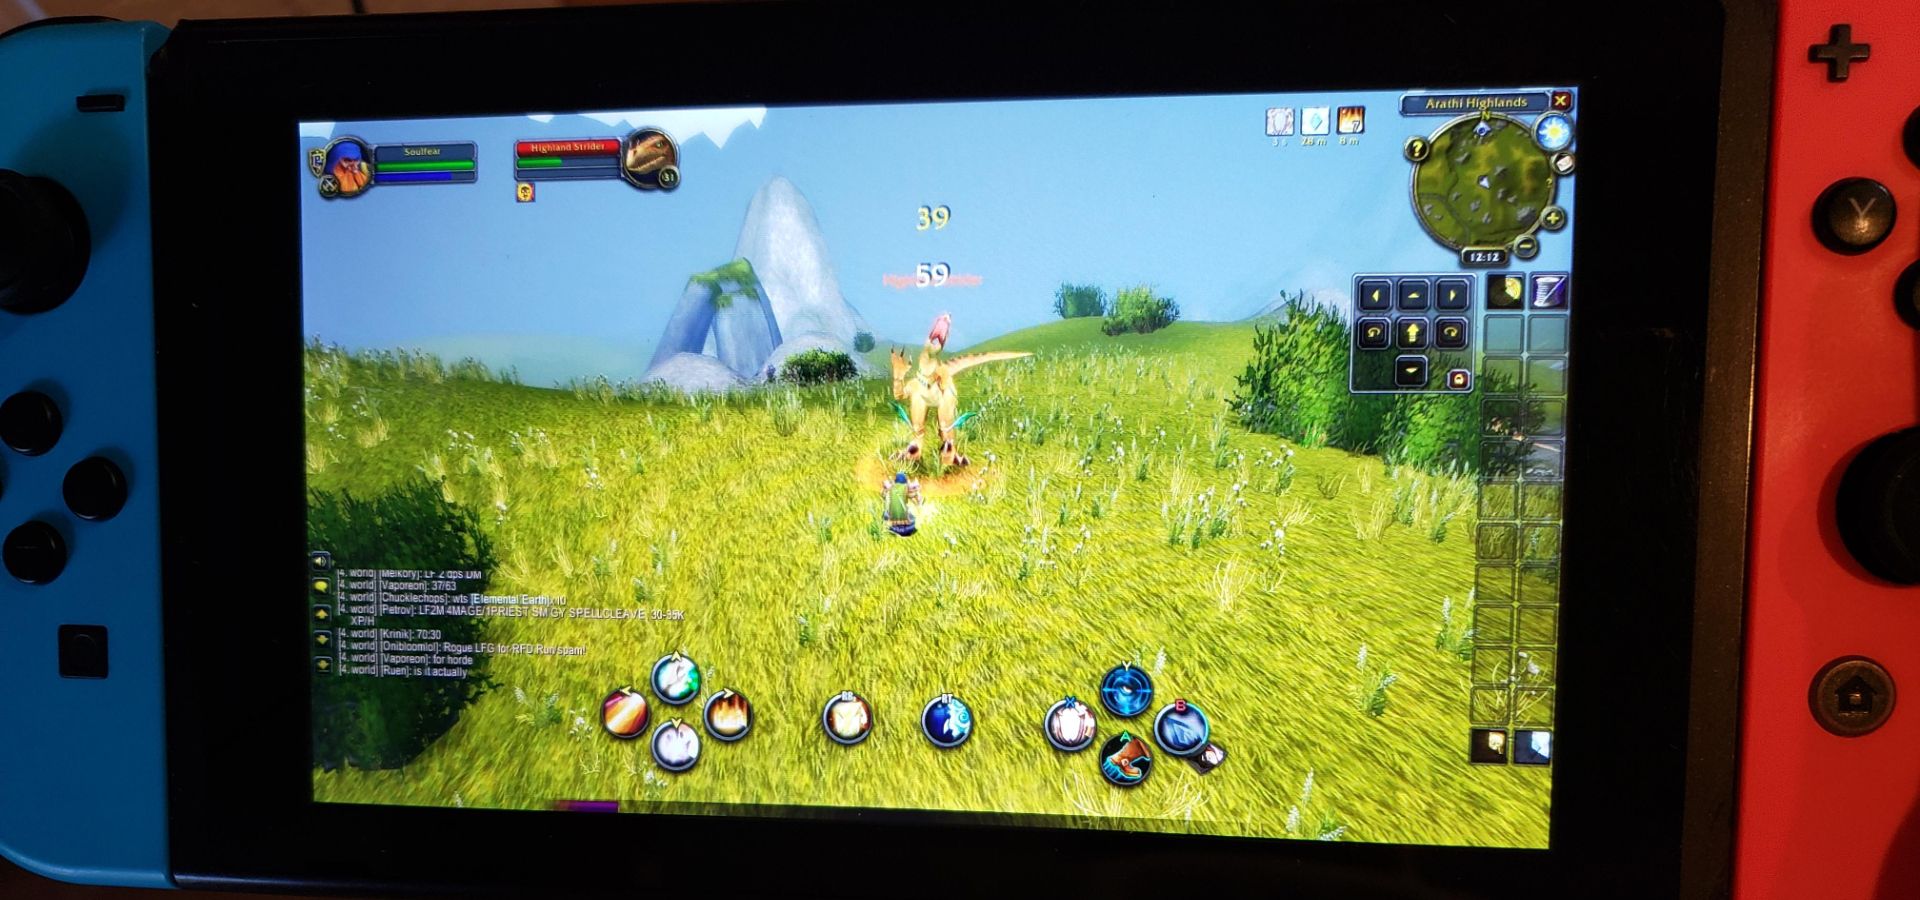 You Can Now Play WoW Classic On Your Nintendo Switch With A Little Work